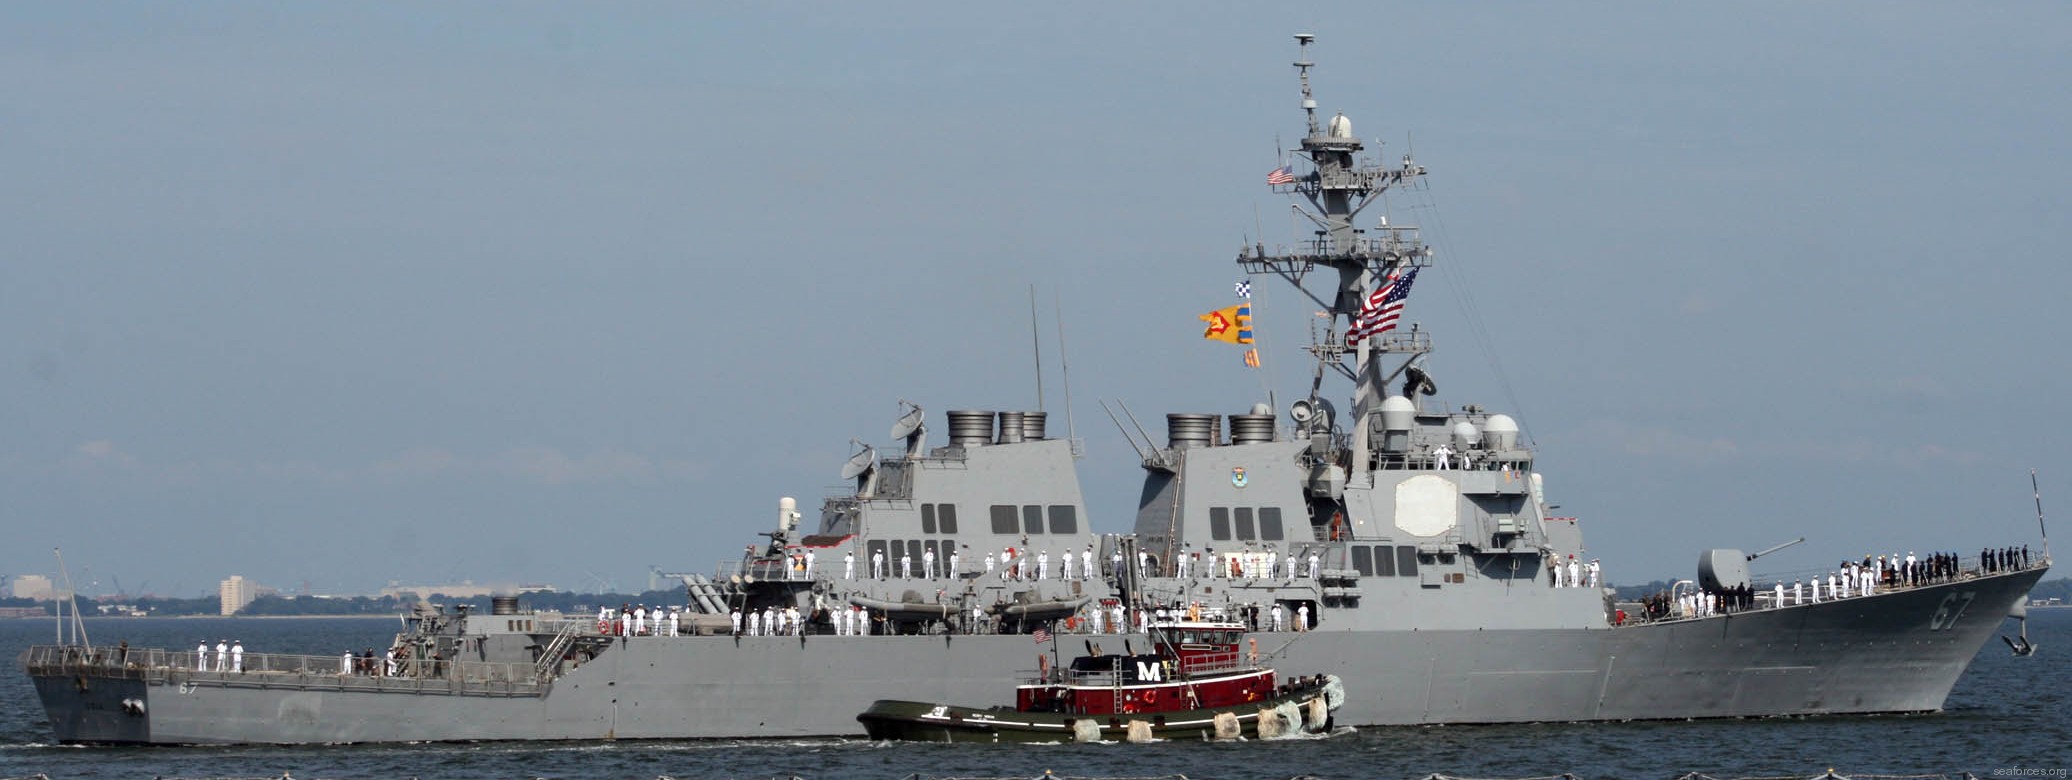 ddg-67 uss cole guided missile destroyer arleigh burke class navy aegis 18 naval station norfolk